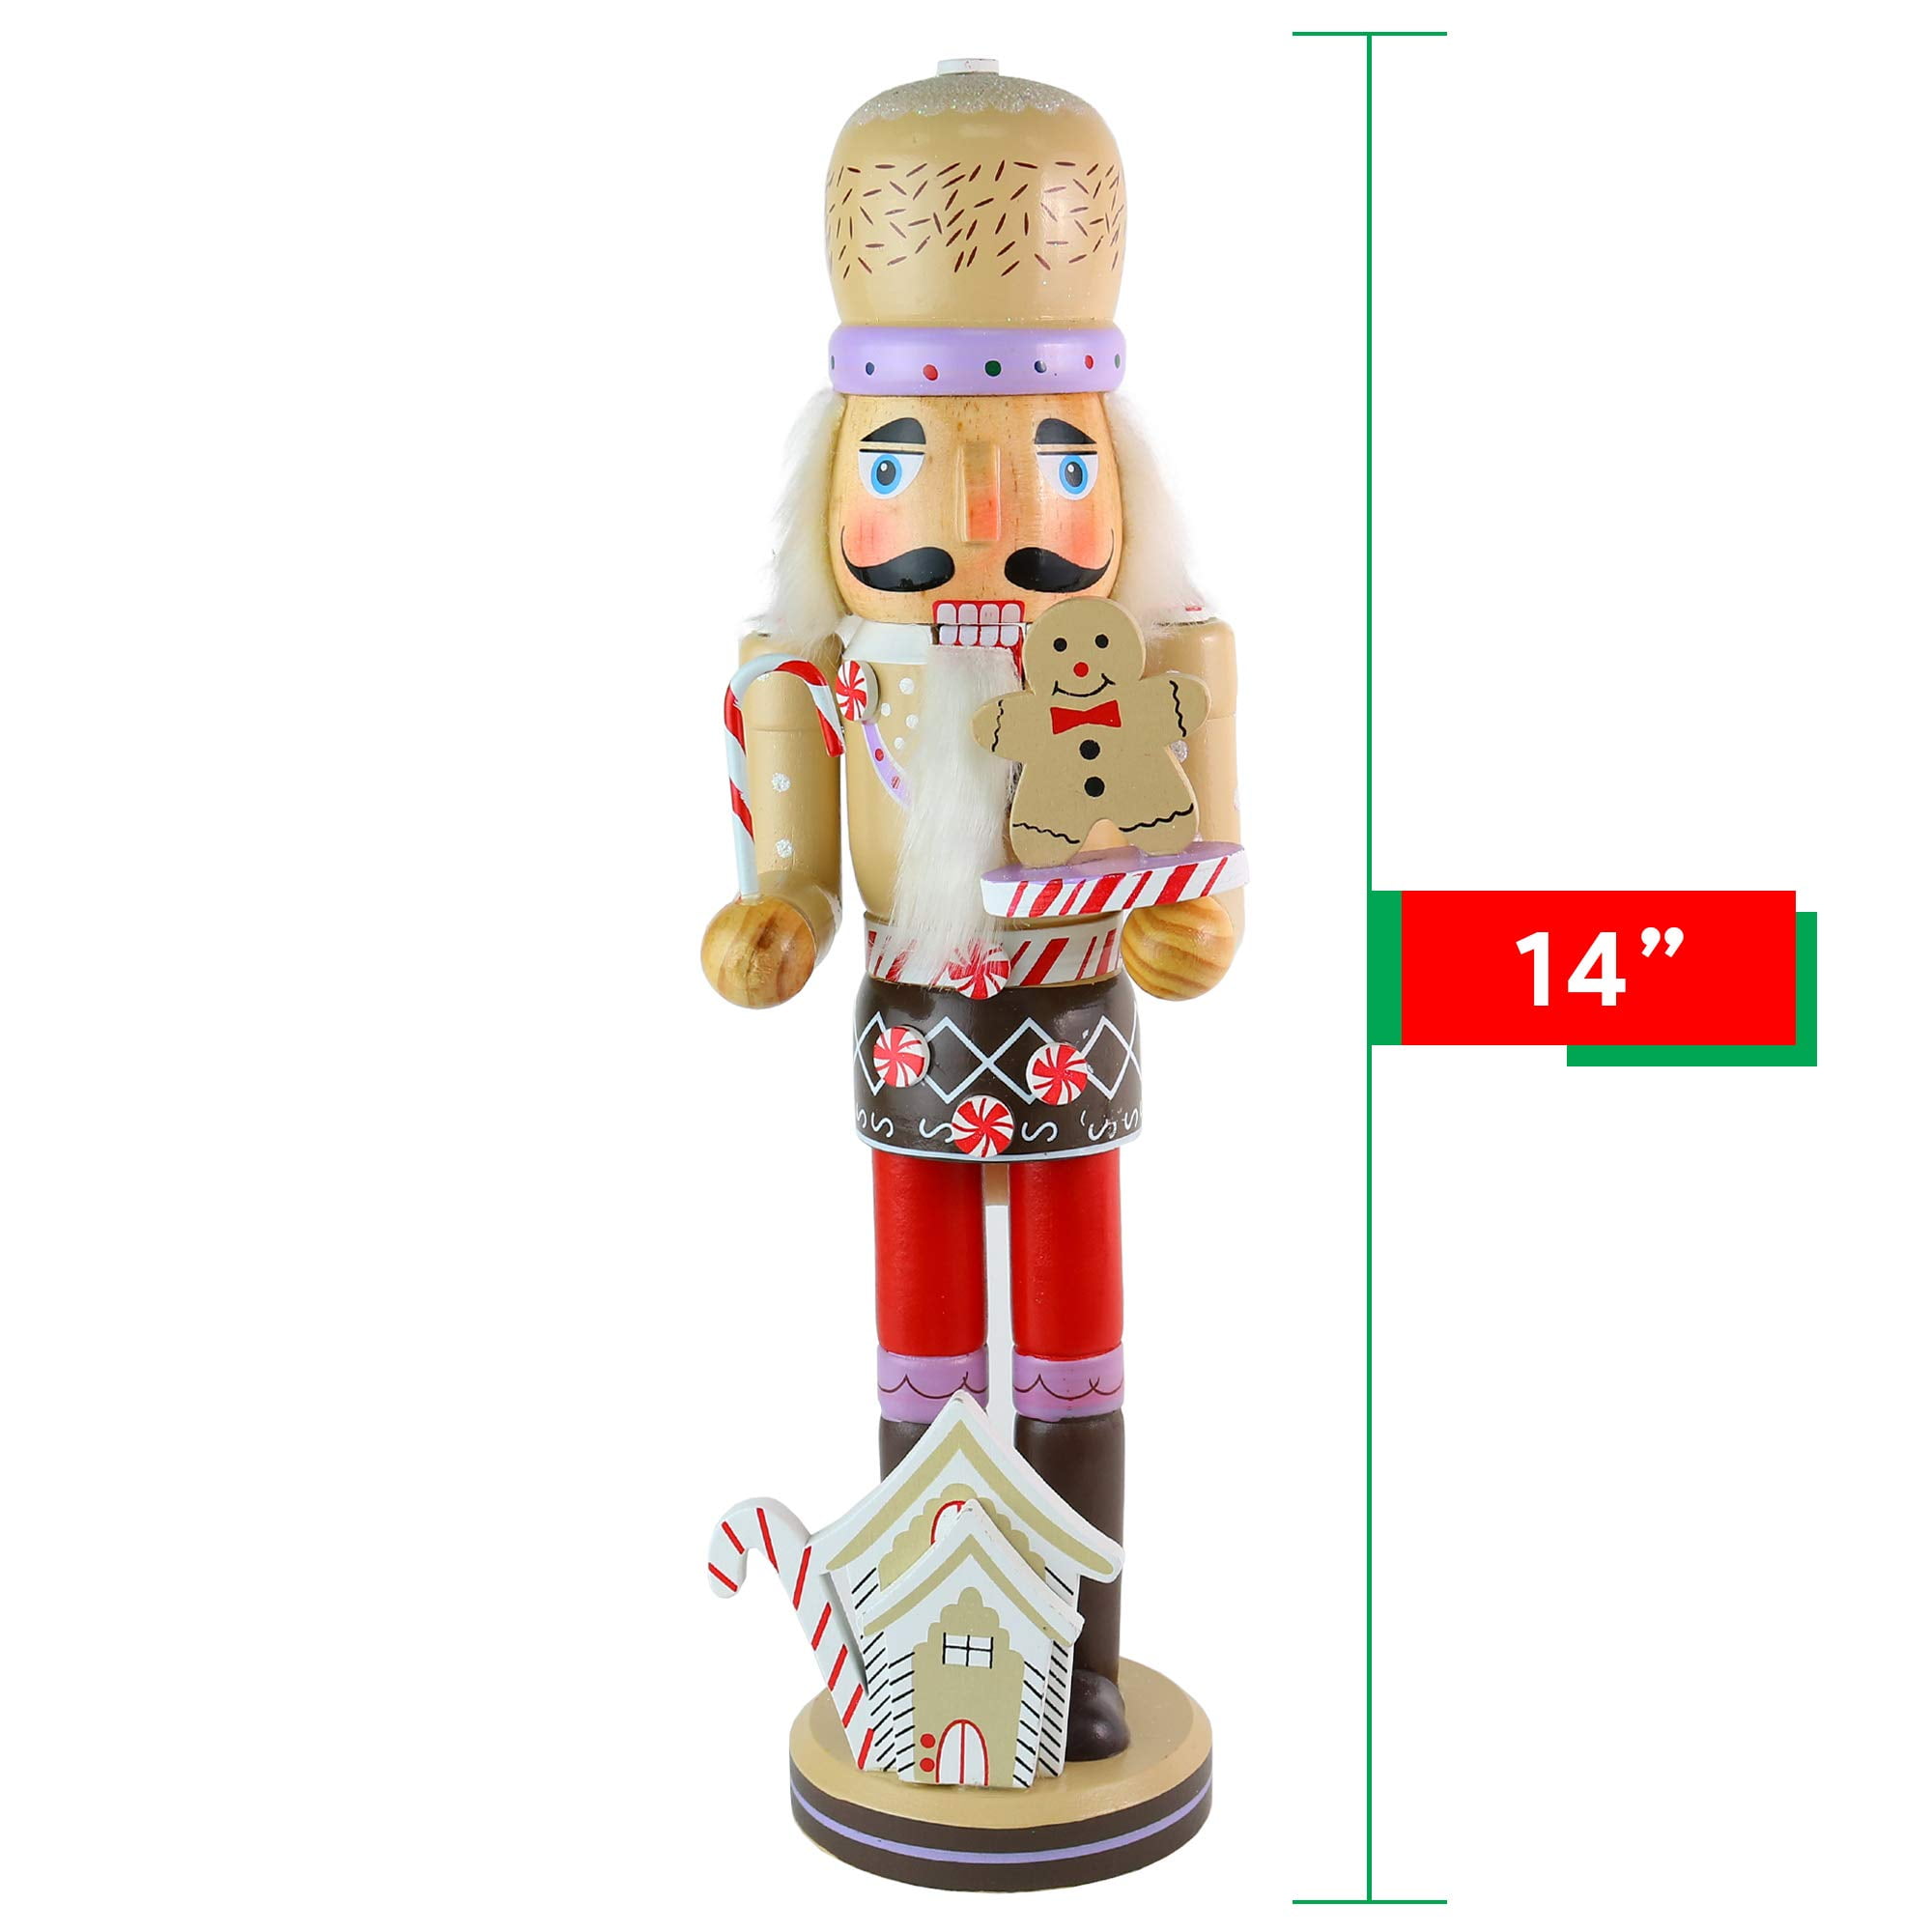 100% Wood Clever Creations Classic Drummer Nutcracker Music Box Blue and Red Drum and Stand Perfect for Any Decor Theme 12” Tall Festive Collectible Nutcracker